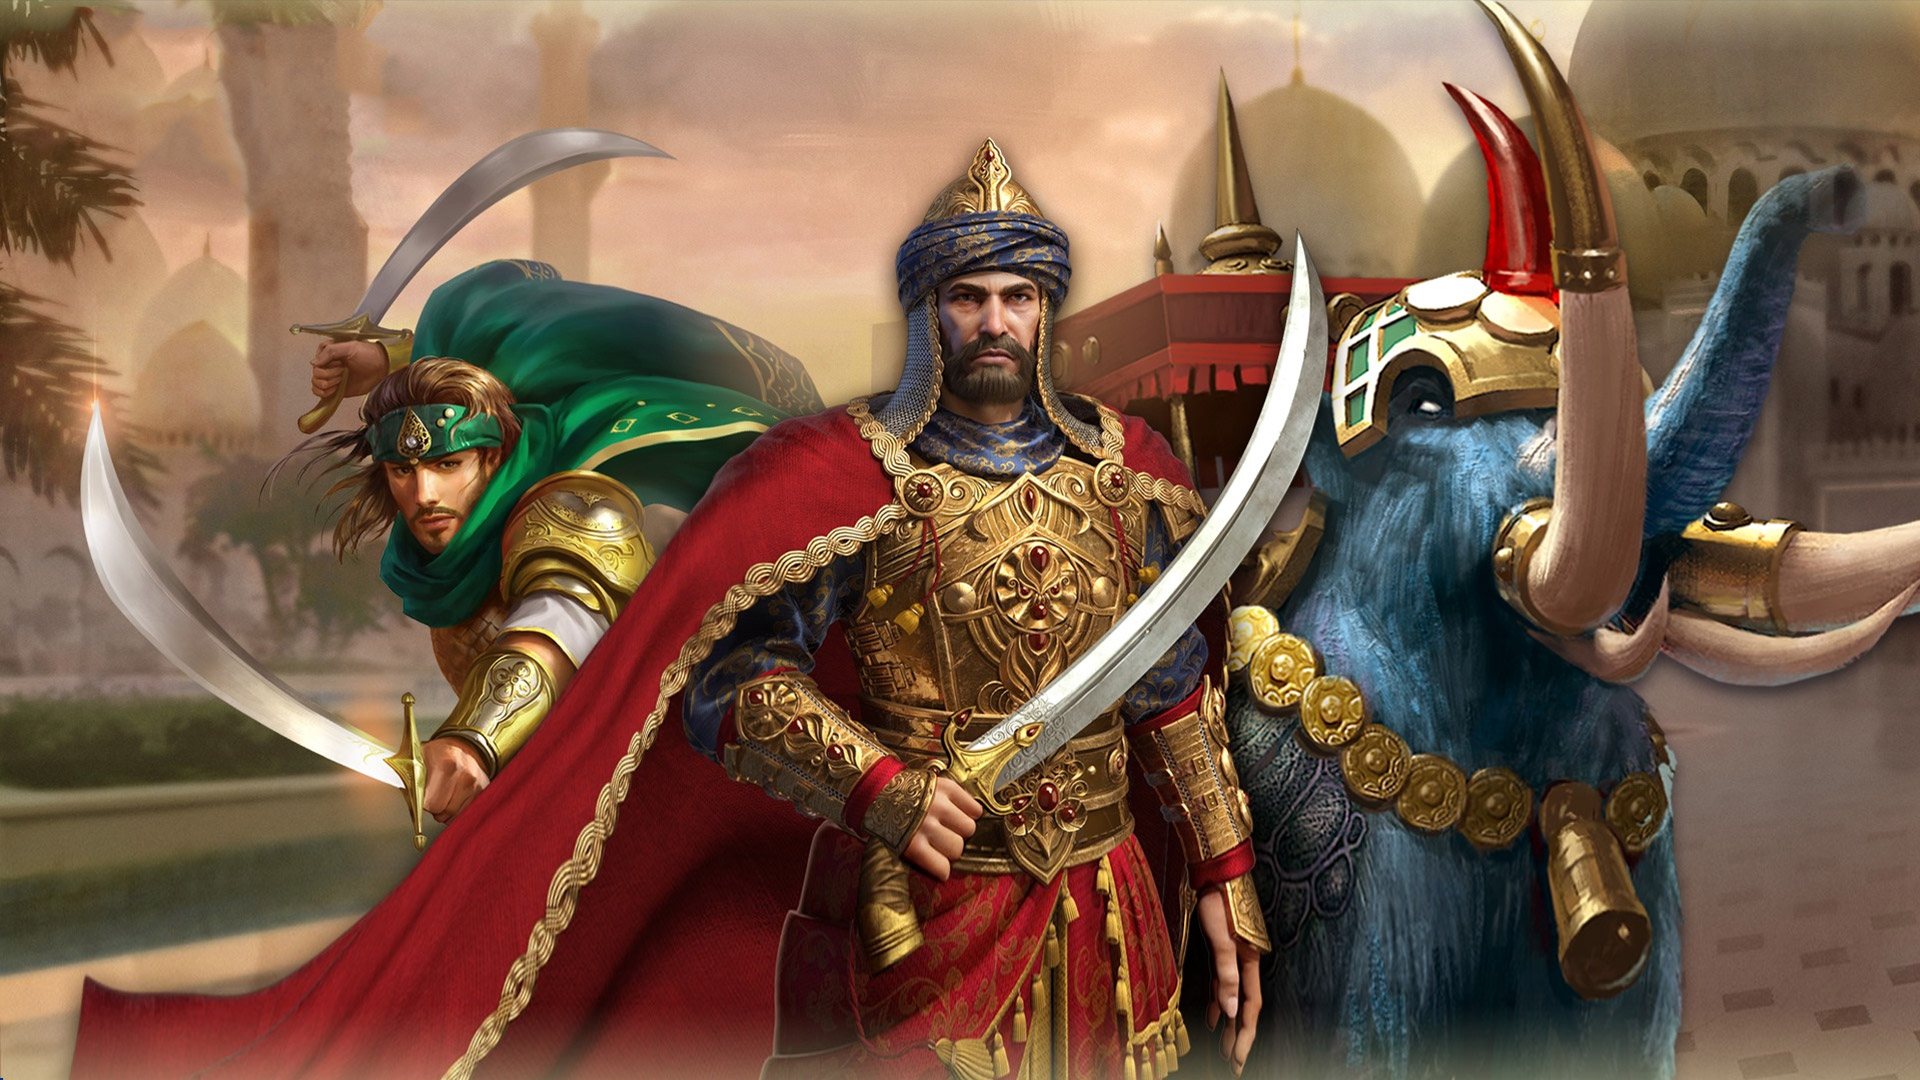 Download Clash of Kings android on PC